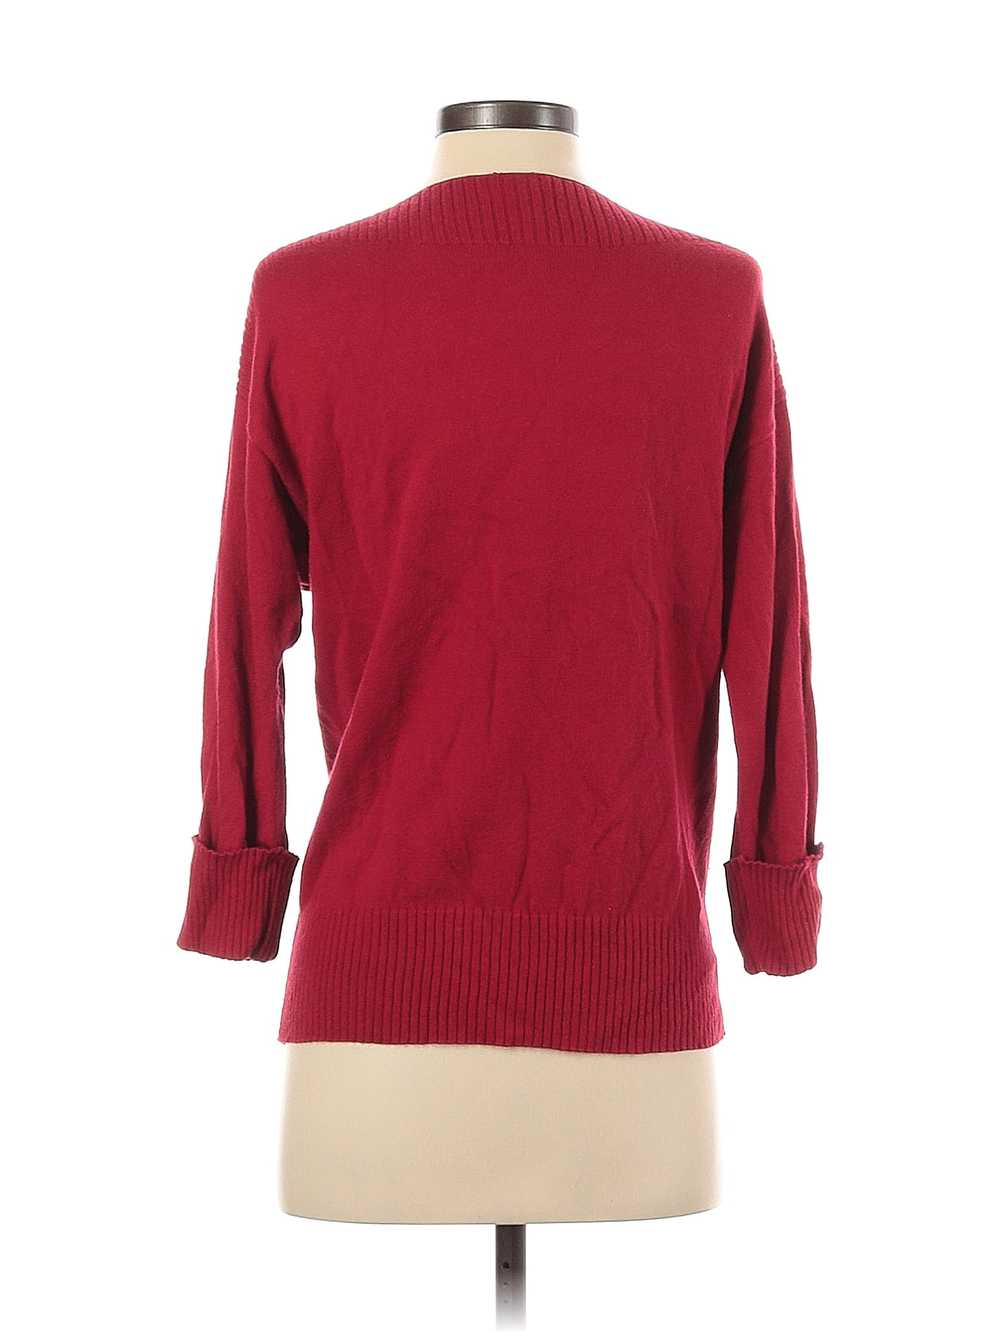 Chico's Women Red Pullover Sweater S - image 2